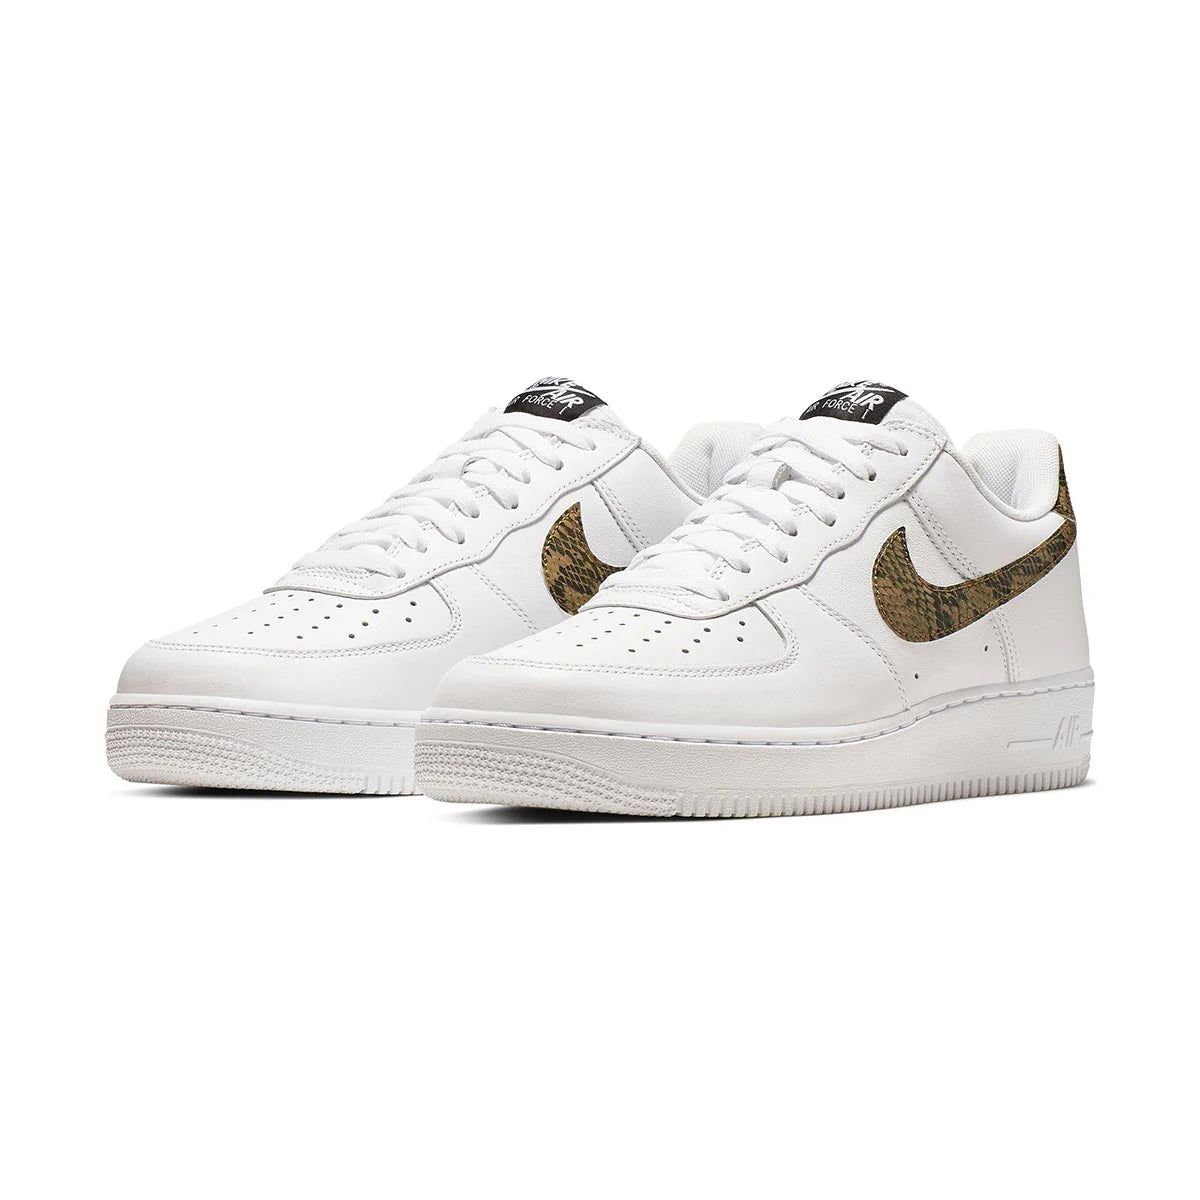 Walking on Air: The Comfort and Durability of Nike Air Force One